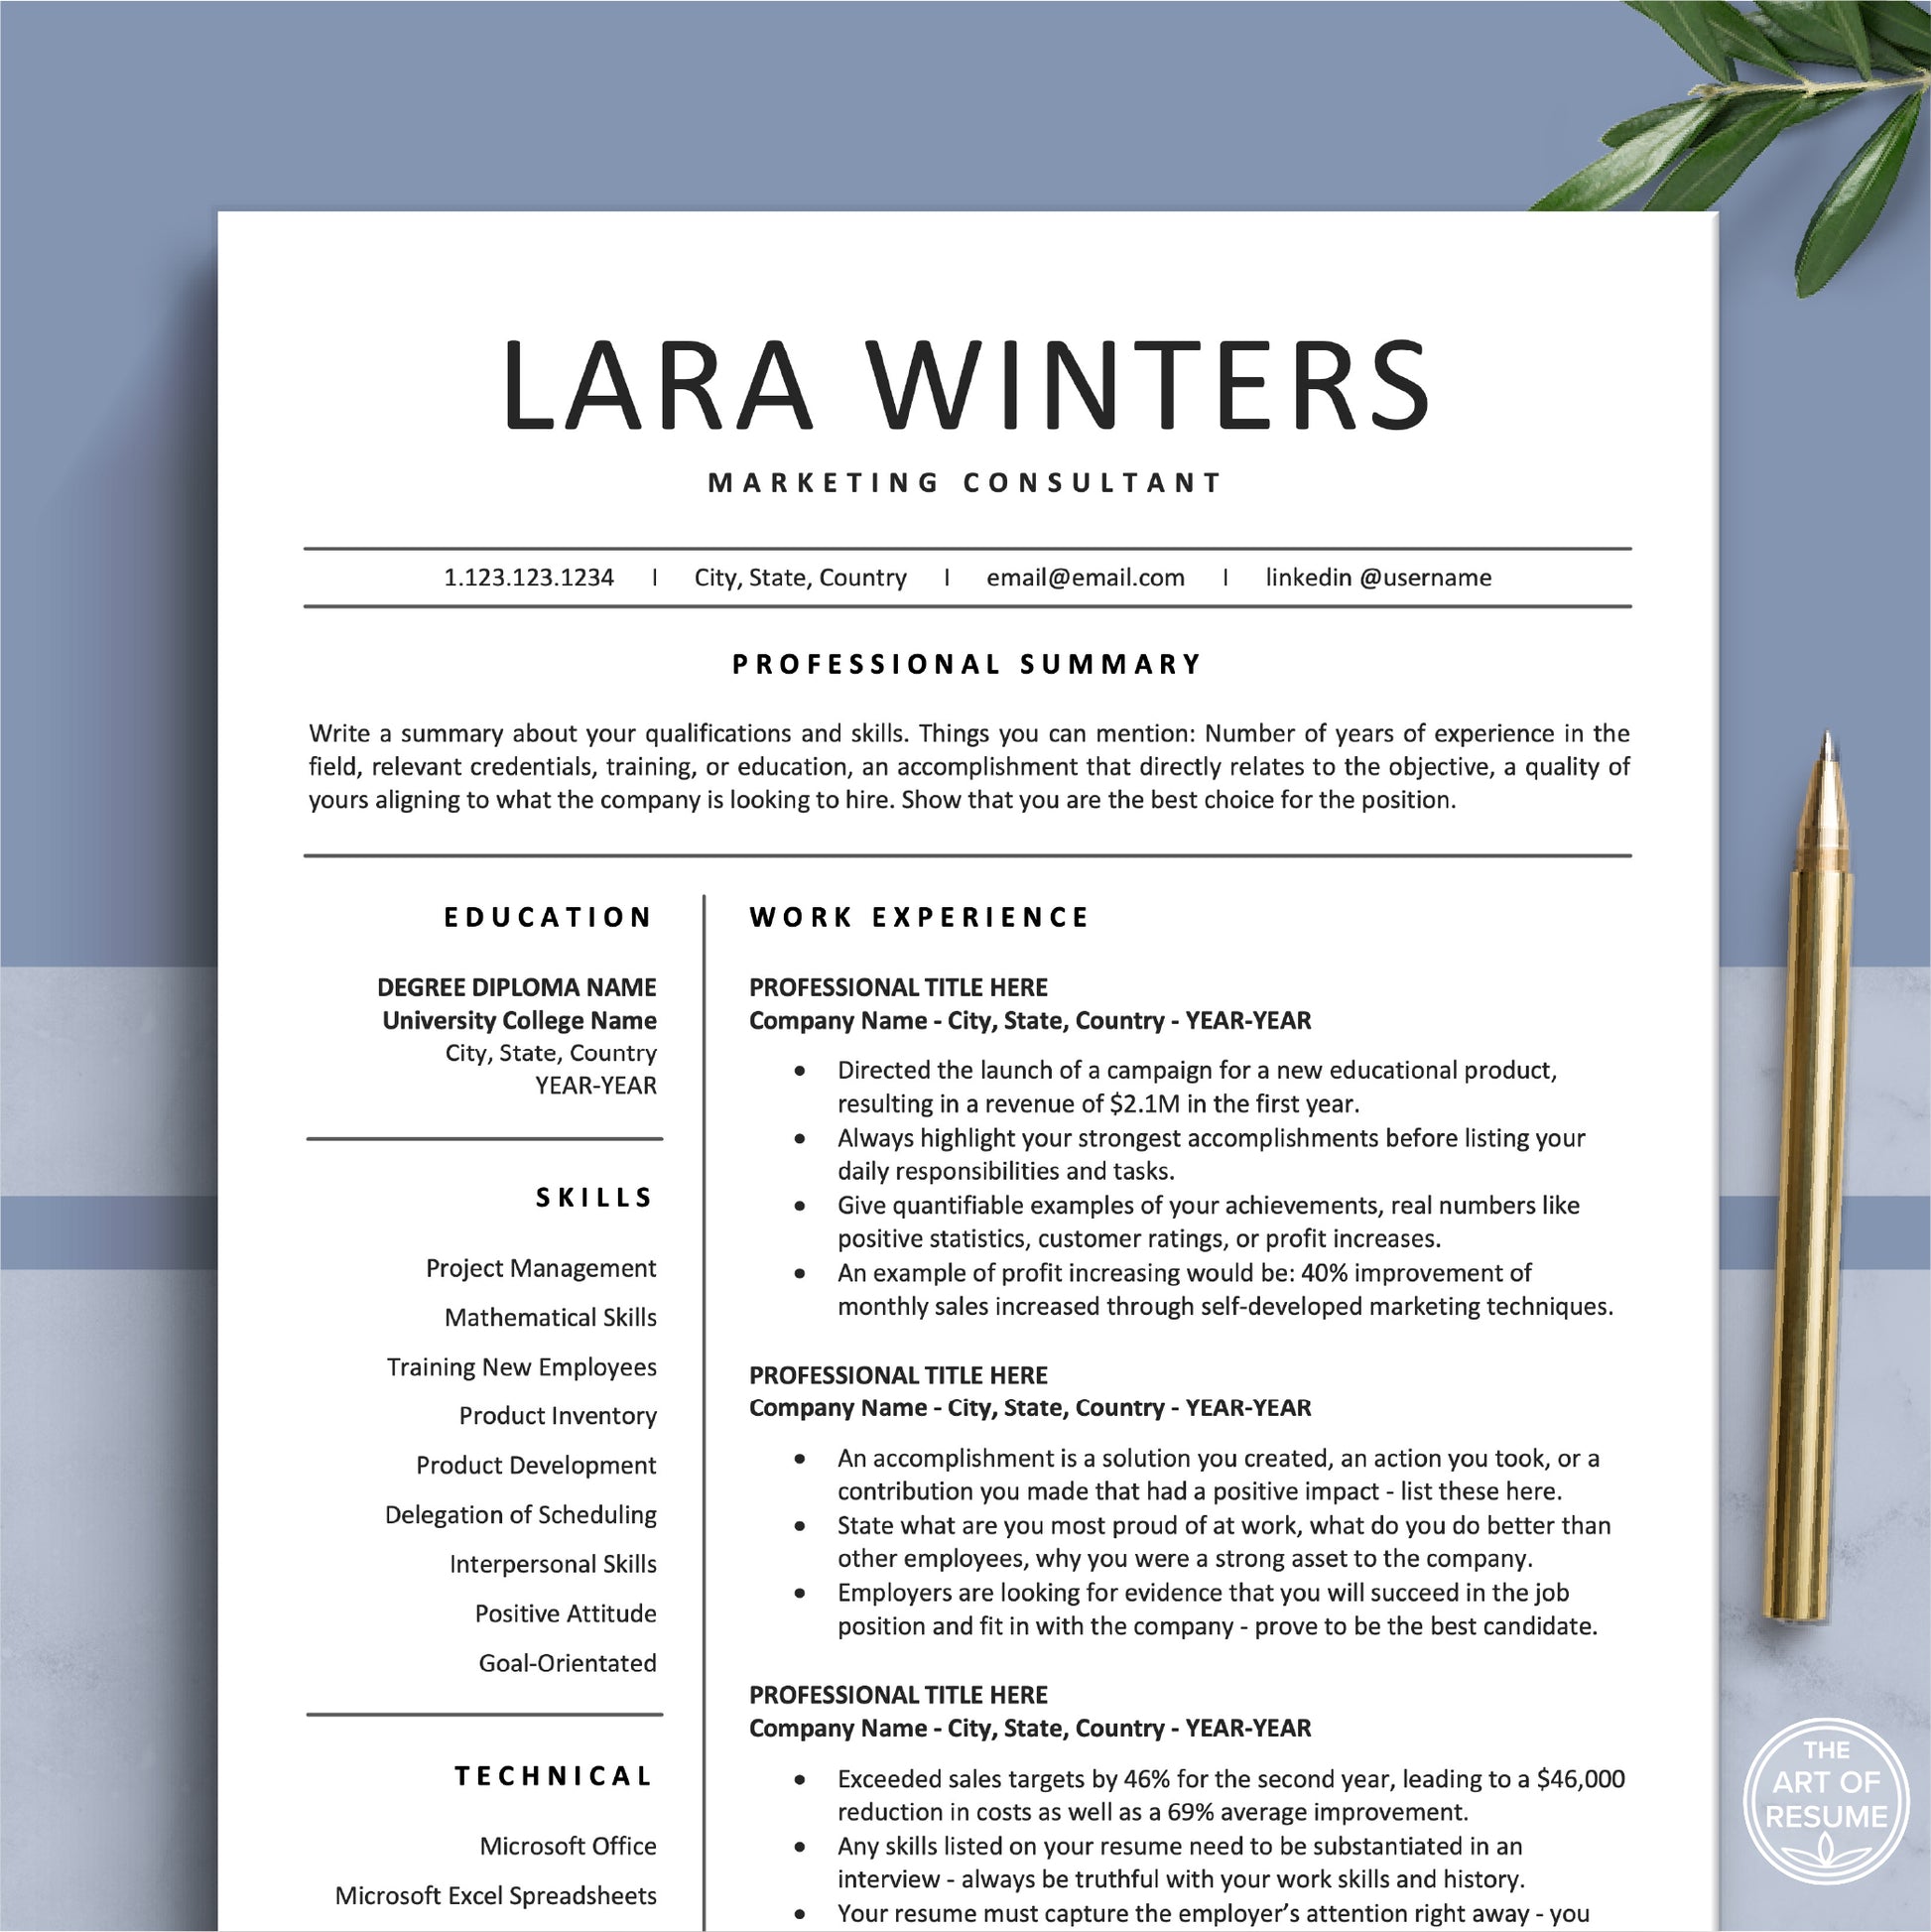 The Art of Resume Templates |  Professional Minimalist Resume CV Template | Curriculum Vitae for Apple Pages, Microsoft Word, Mac, PC